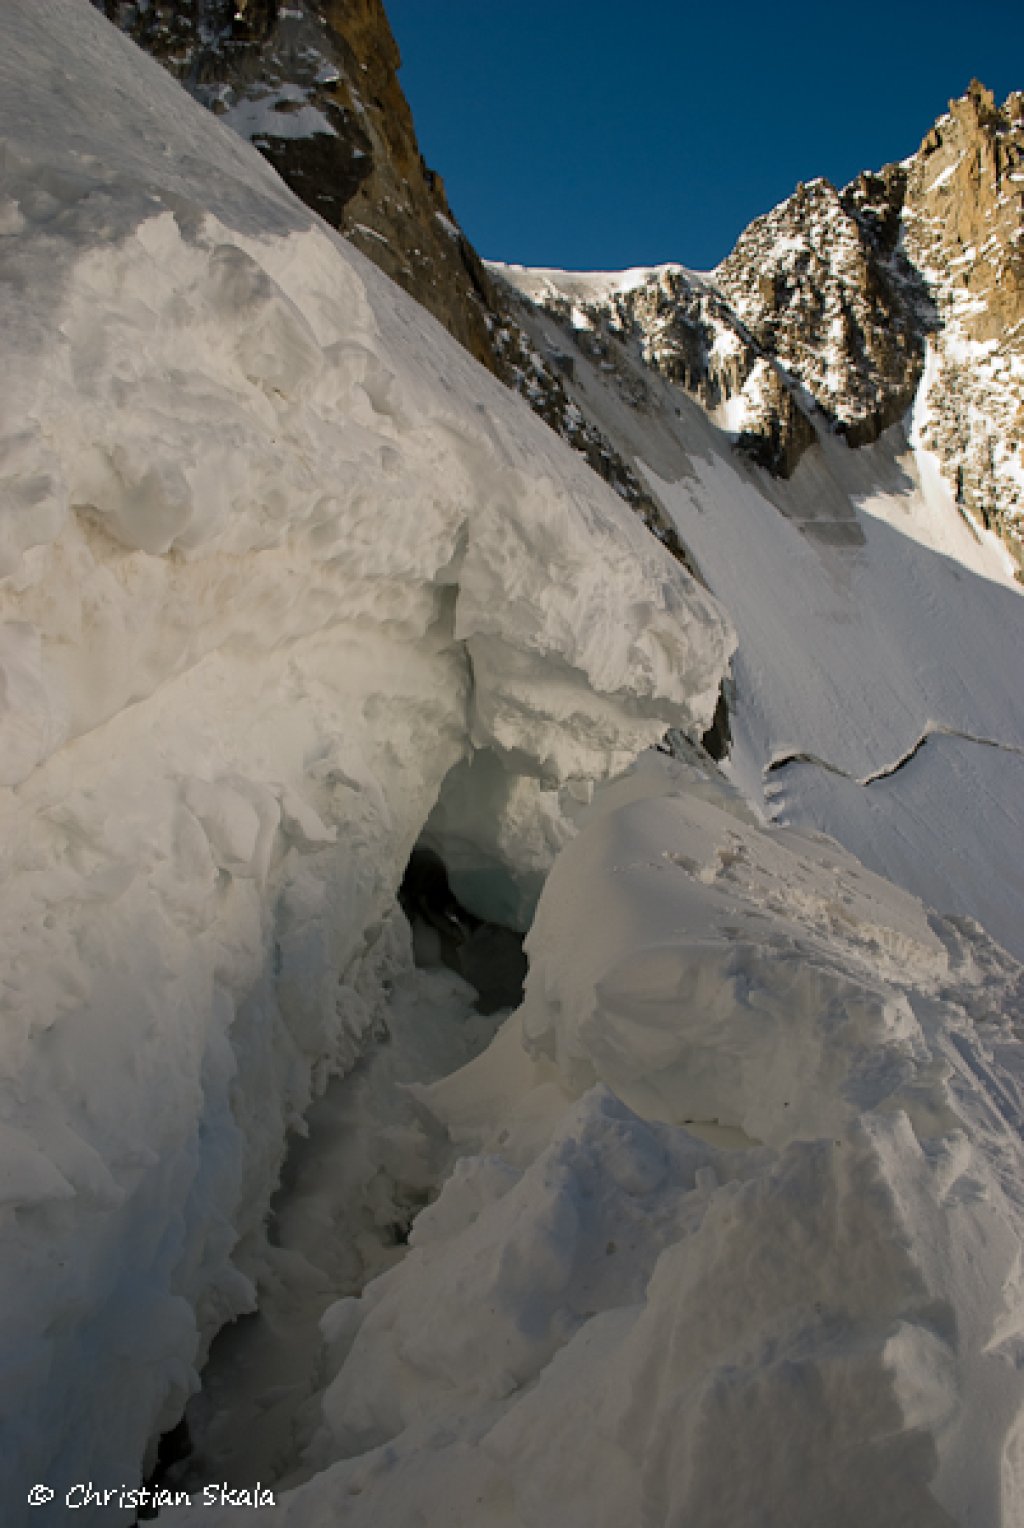 Bergschrund at the entrance to the couloir